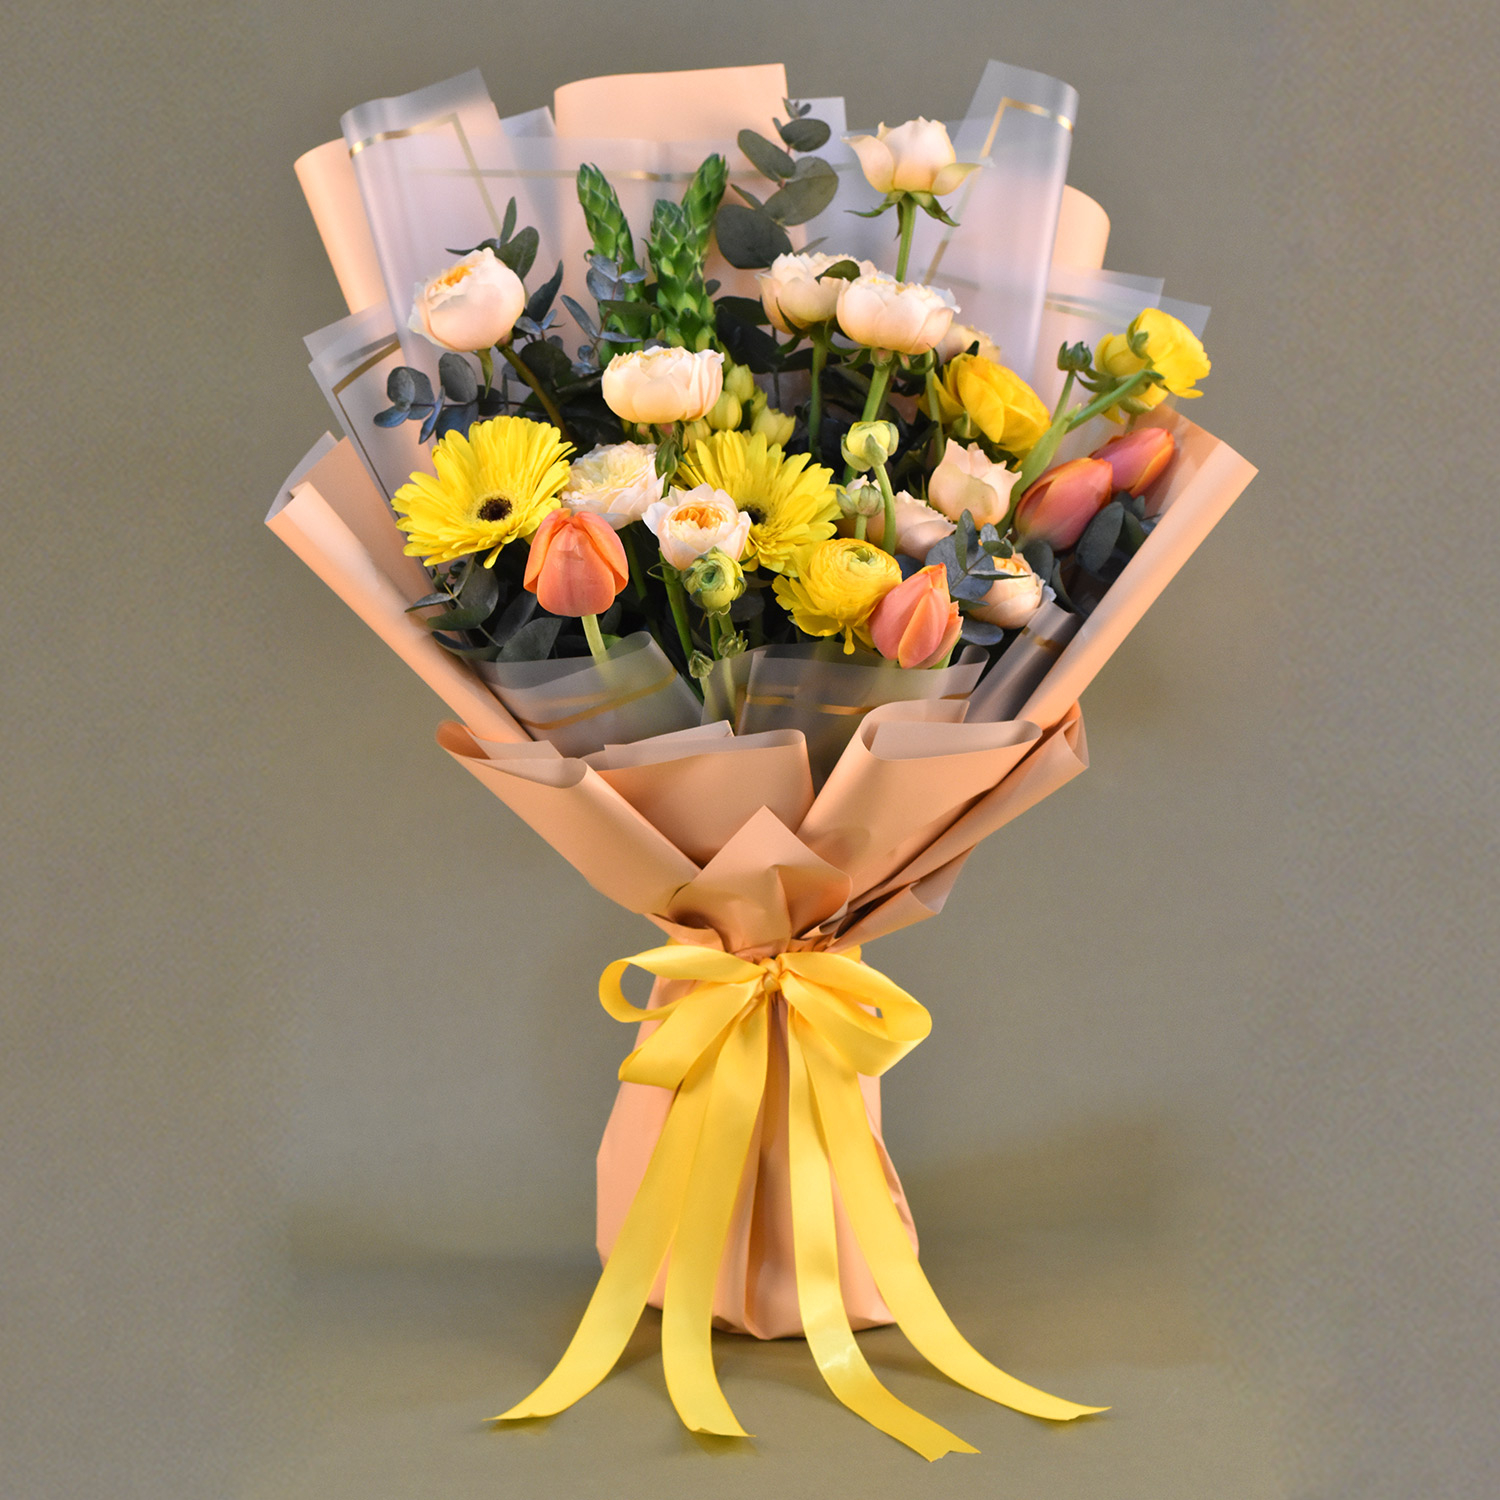 Online Spunky Mixed Flowers Bouquet Gift Delivery in Malaysia - FNP